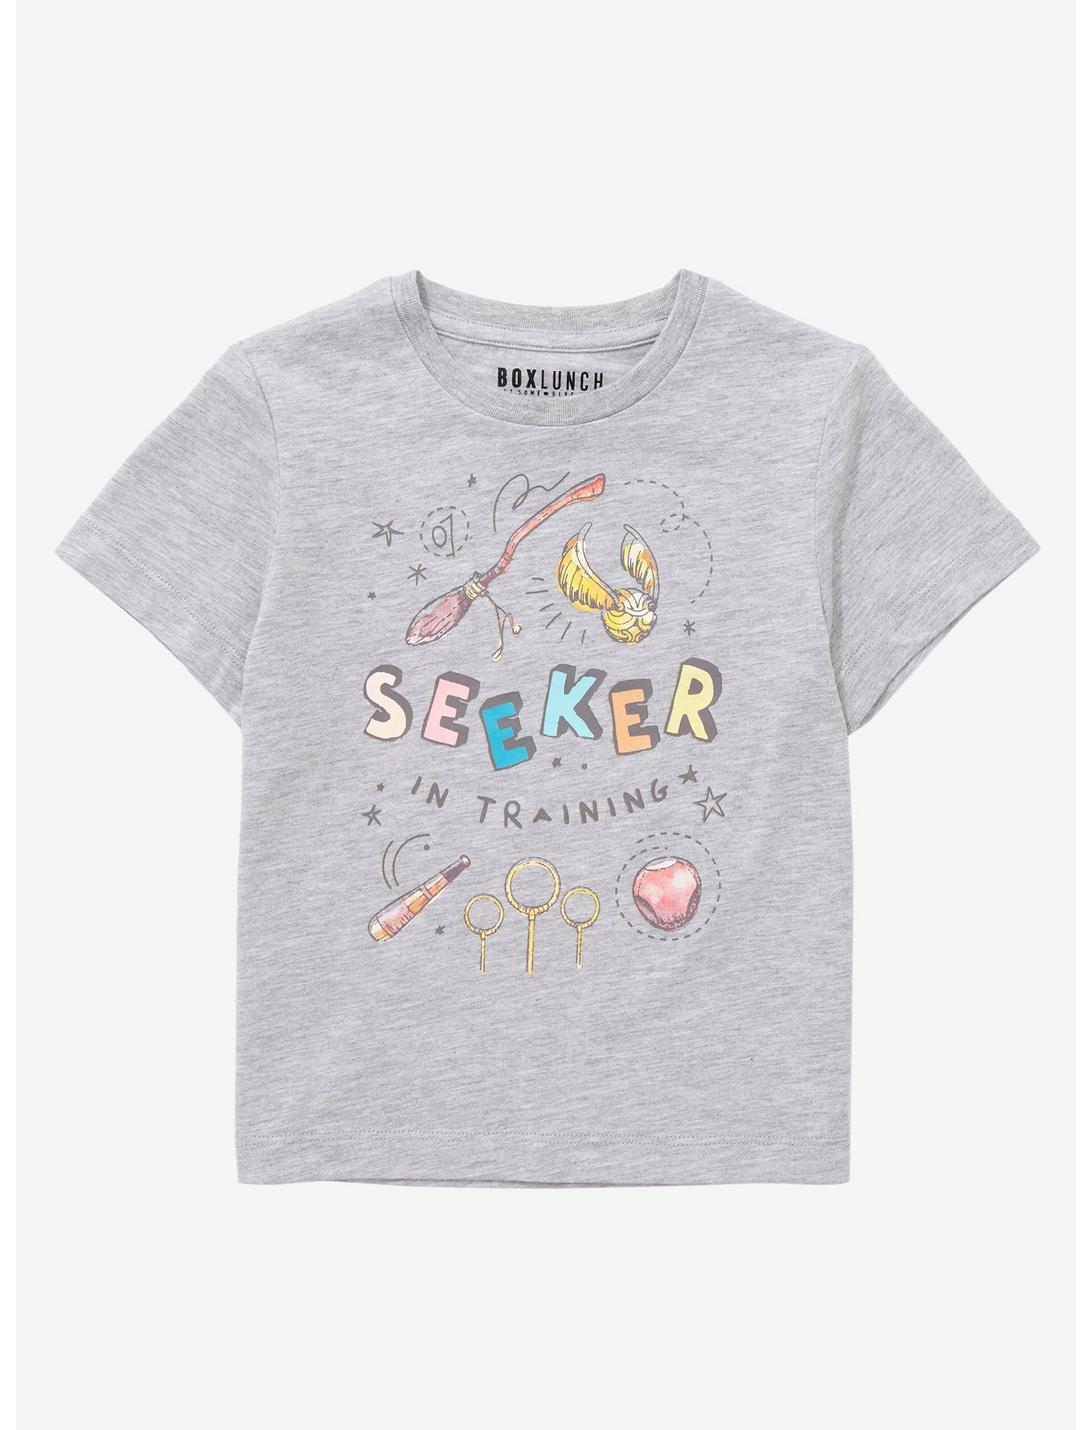 Harry Potter Seeker in Training Toddler T-Shirt - BoxLunch Exclusive, HEATHER GREY, hi-res